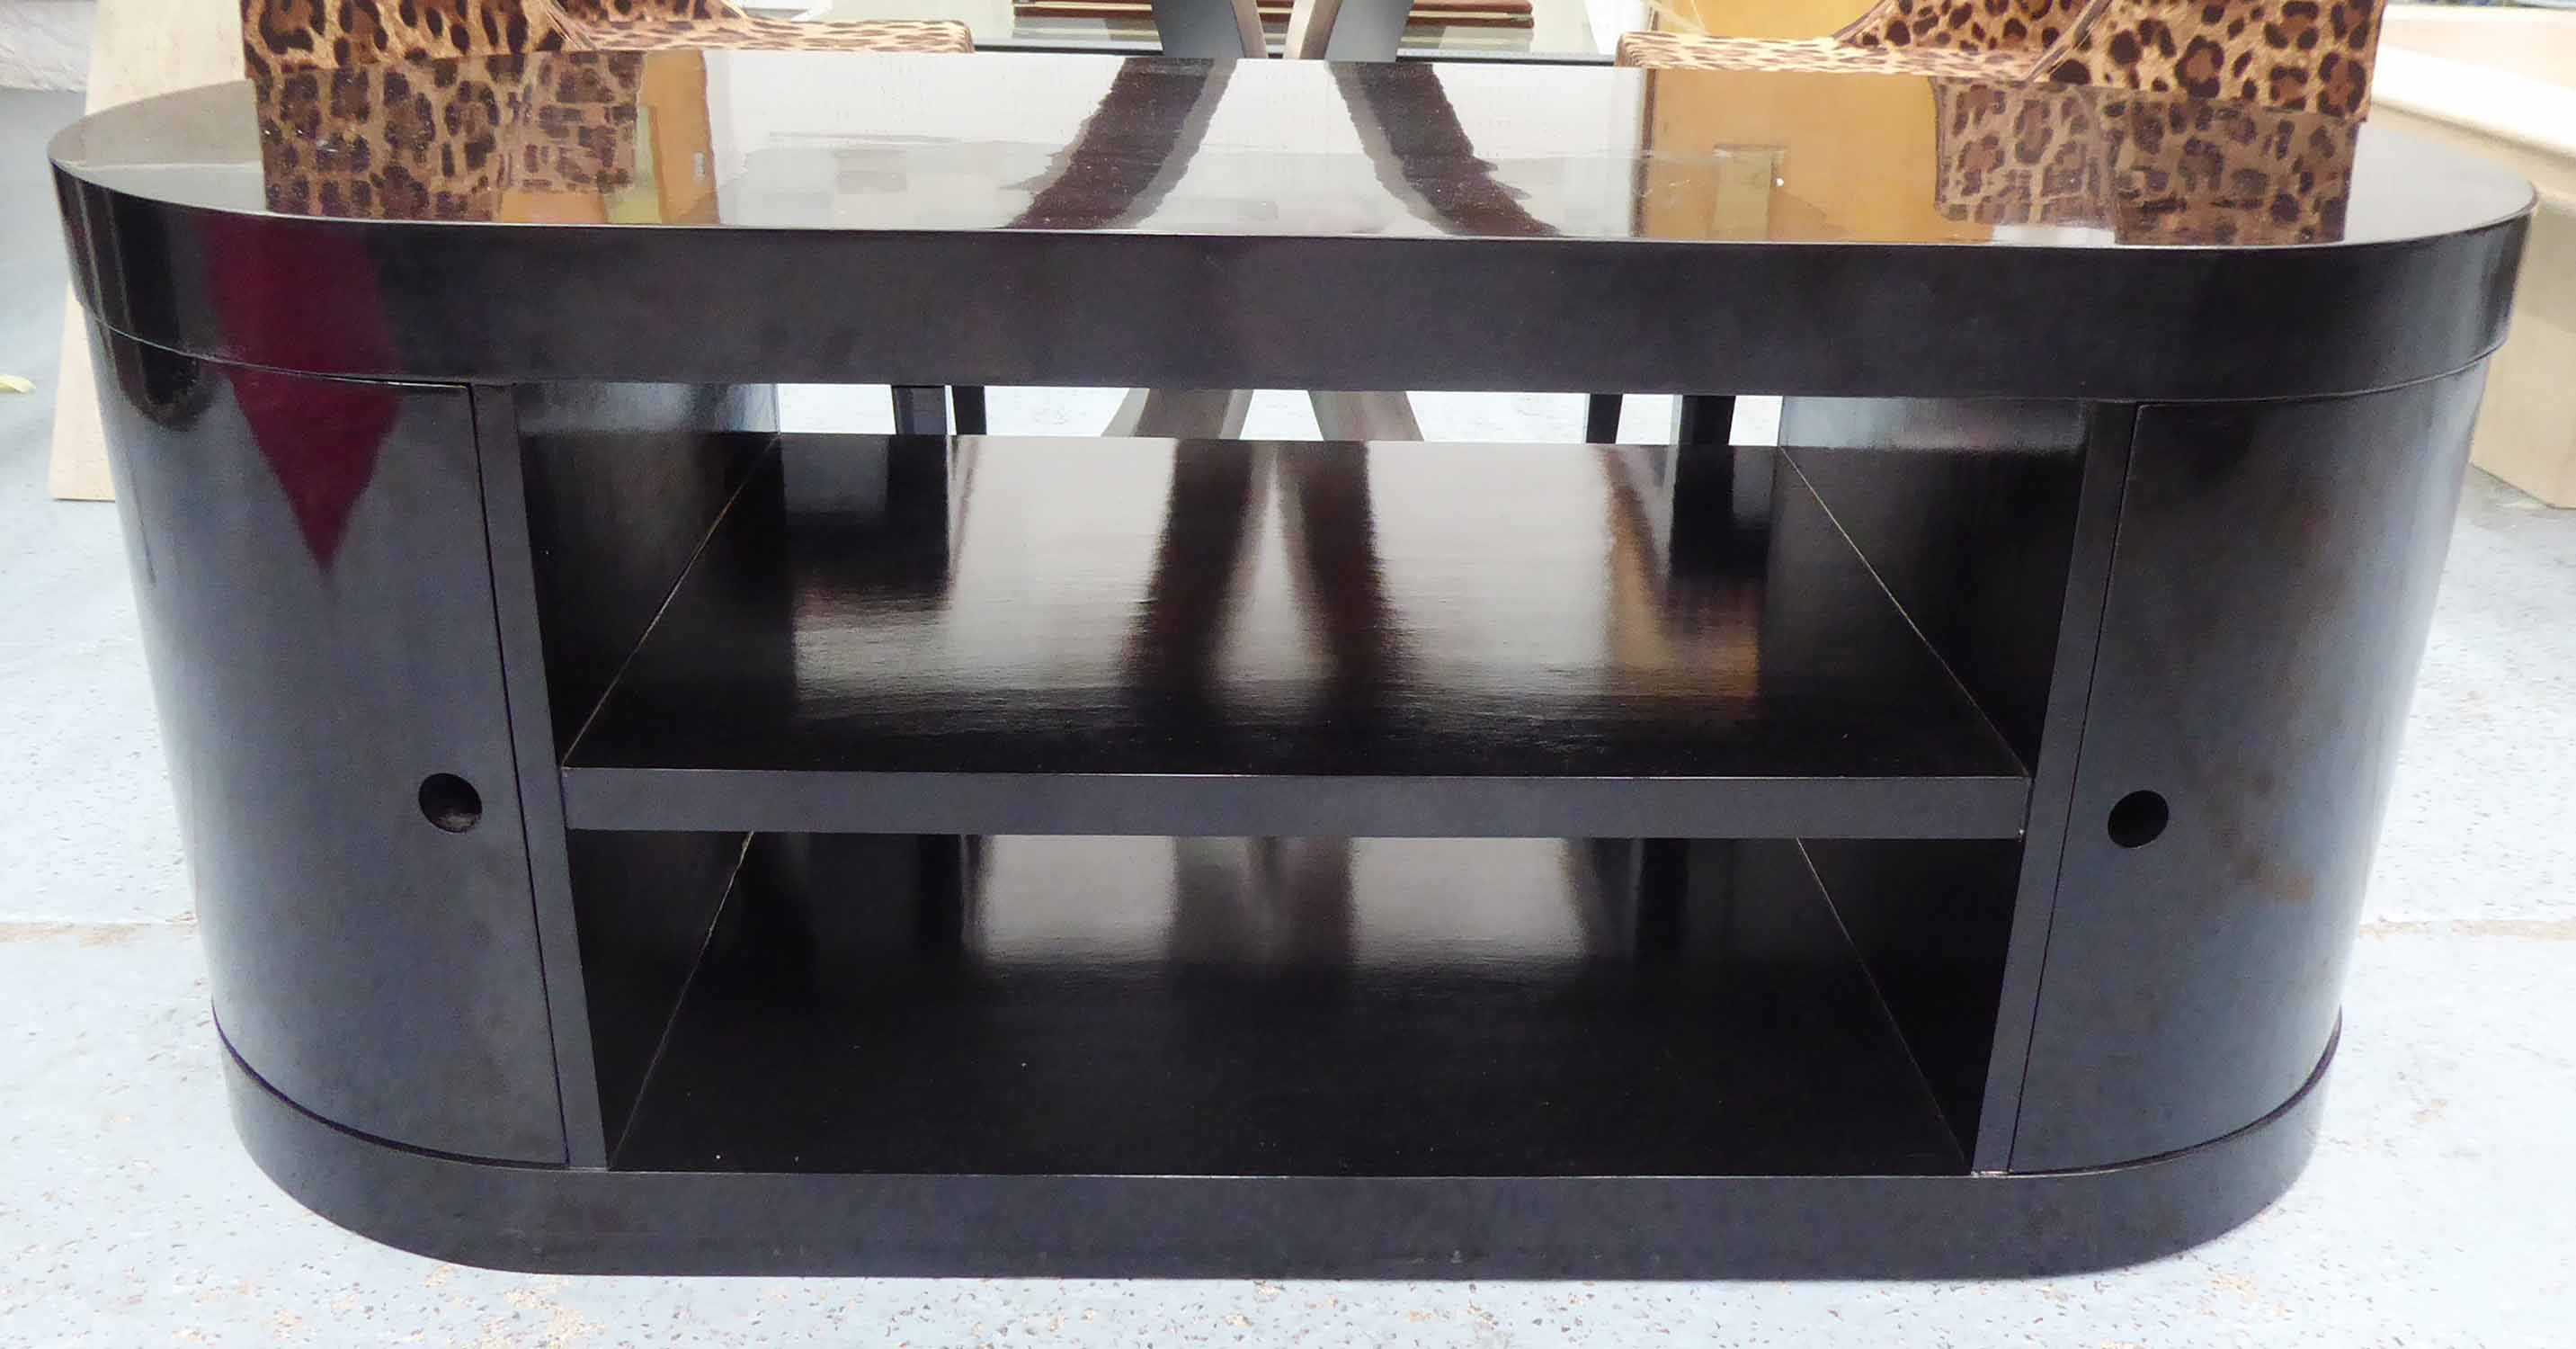 MEDIA CONSOLE, contemporary Continental style, black lacquered finish, 122cm x 52cm x 52cm. - Image 2 of 2